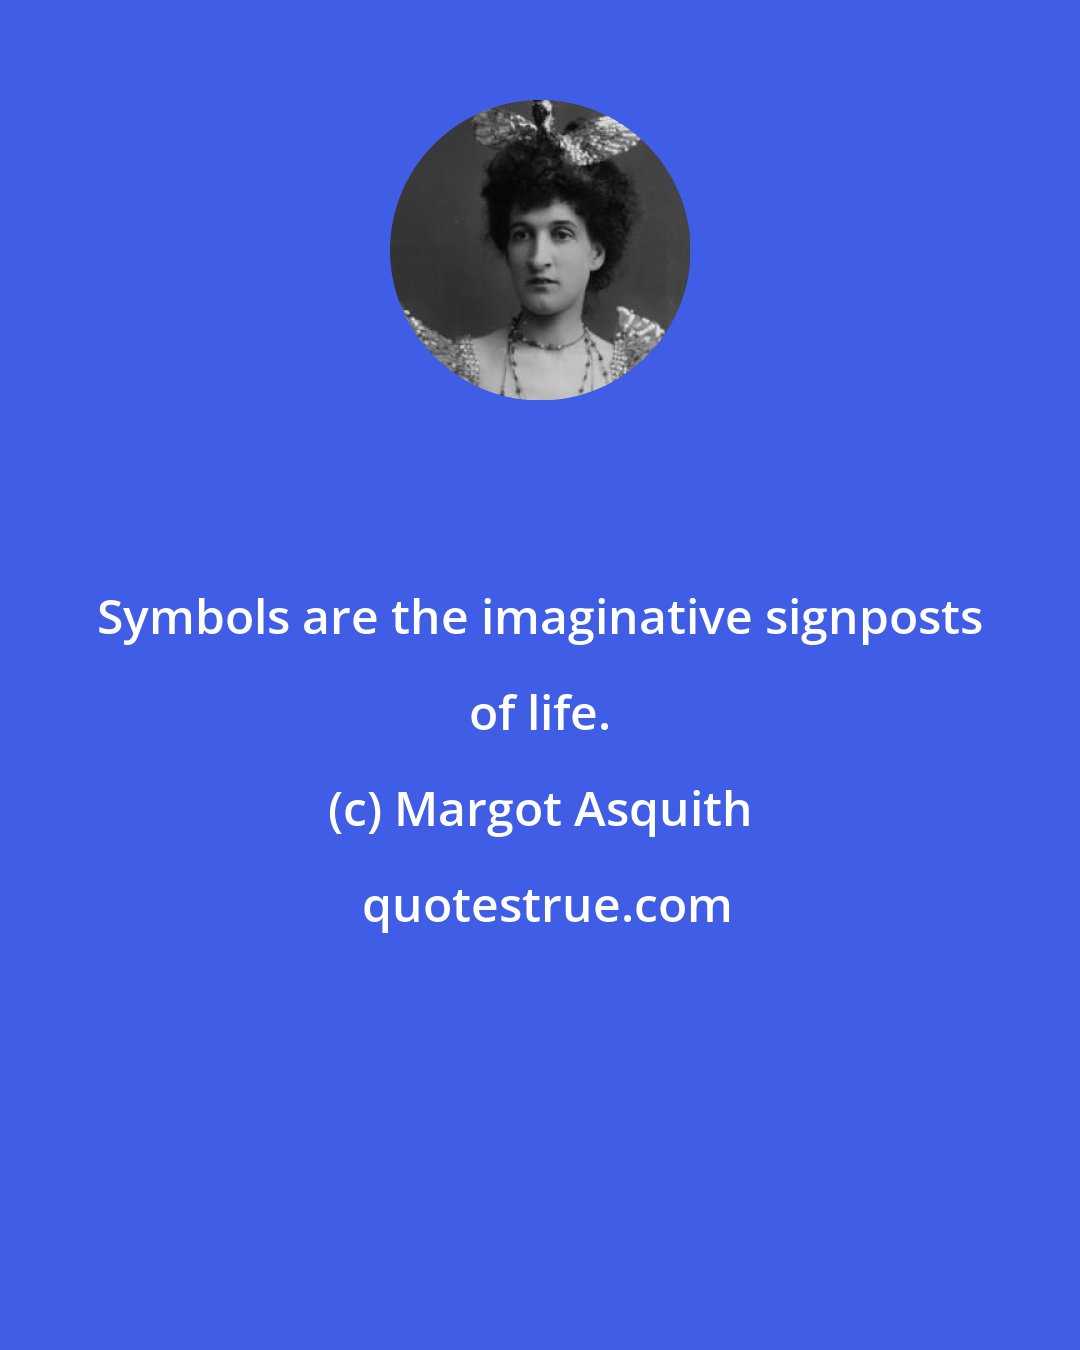 Margot Asquith: Symbols are the imaginative signposts of life.